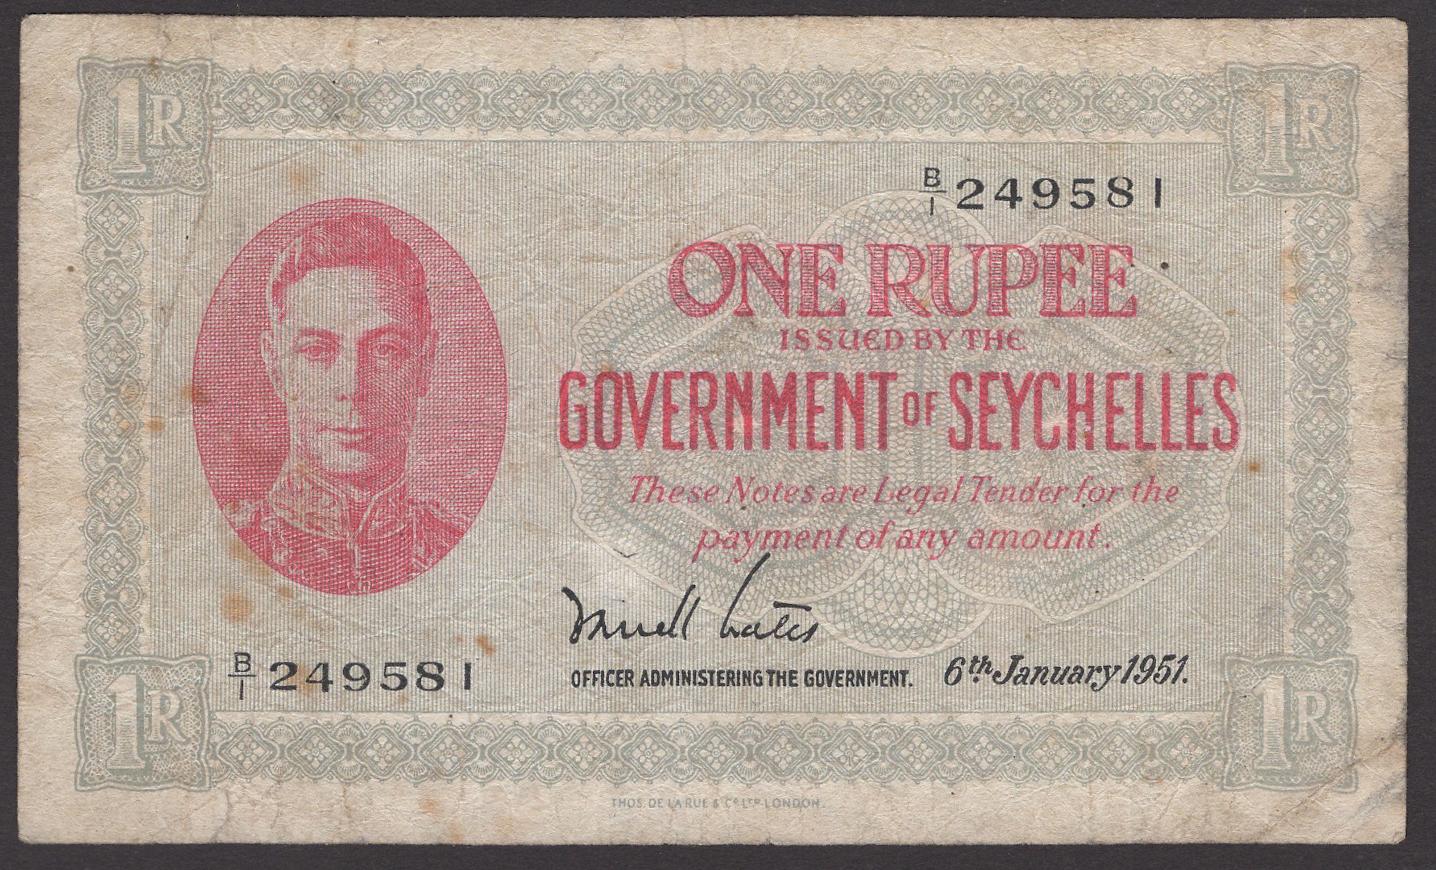 Government of the Seychelles, 1 Rupee, 6 January 1951, serial number B/1 249581, Bates...